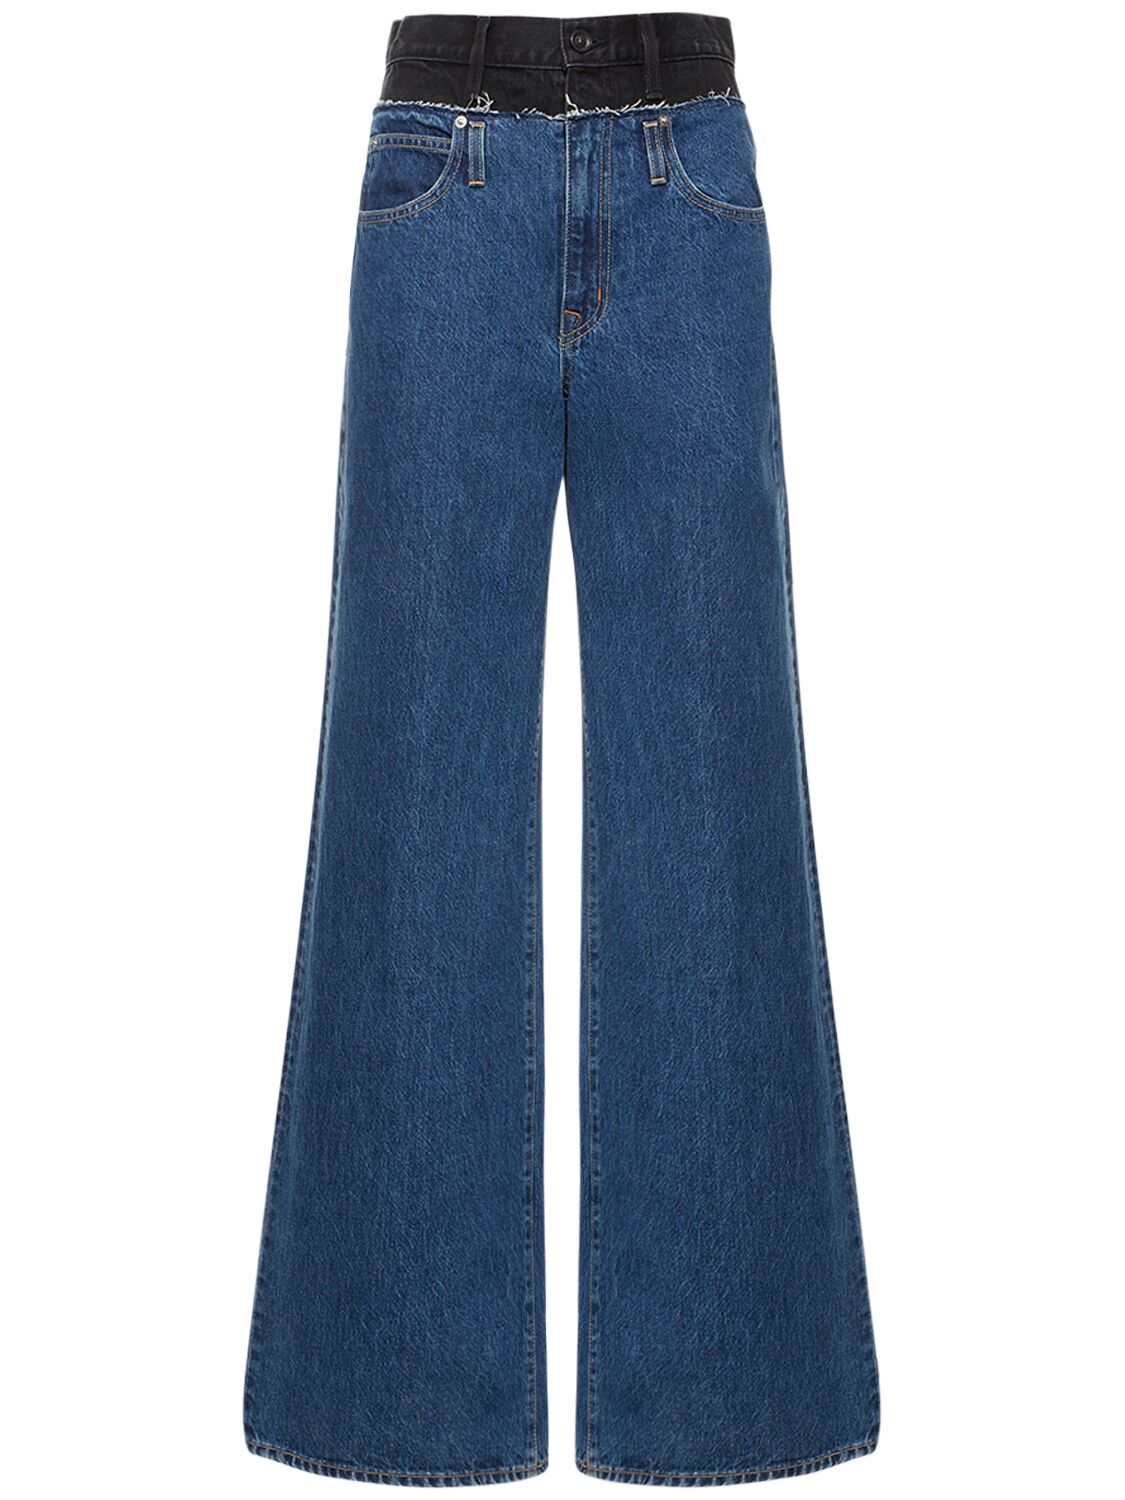 Re-worked Eva Double Waistband Jeans